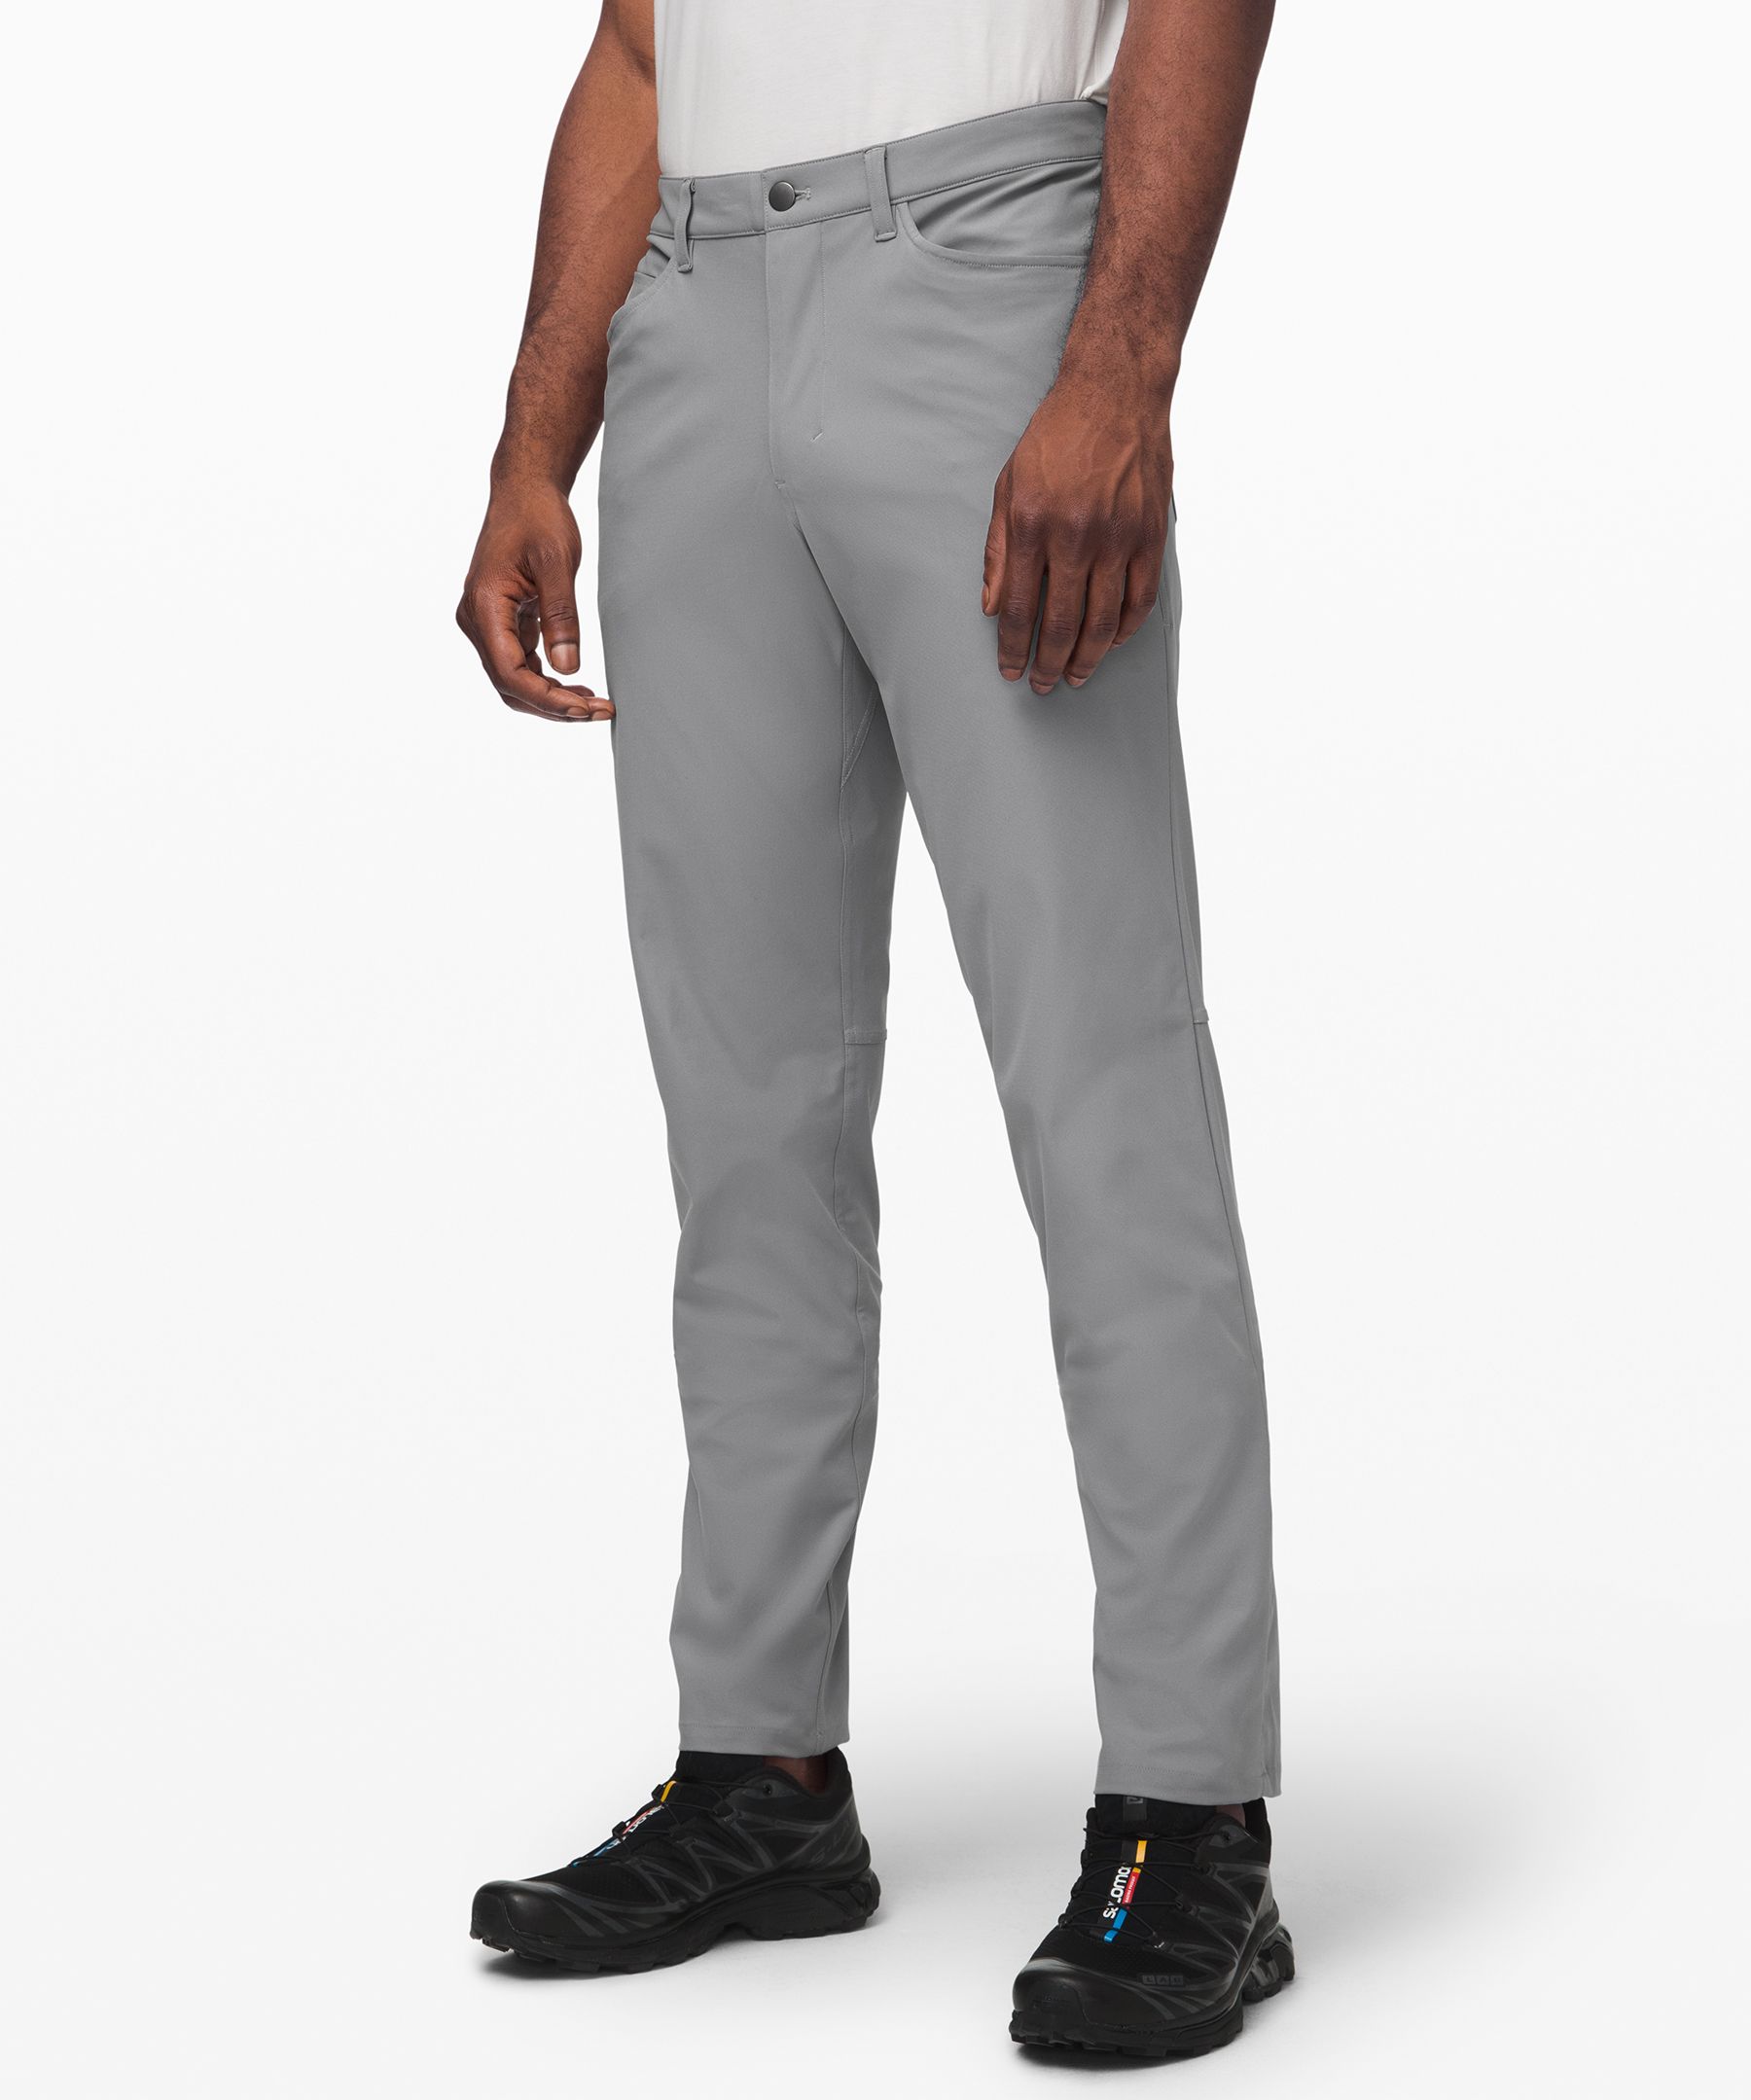 Lululemon Abc Pant Classic *warpstreme 30" Online Only In Grey